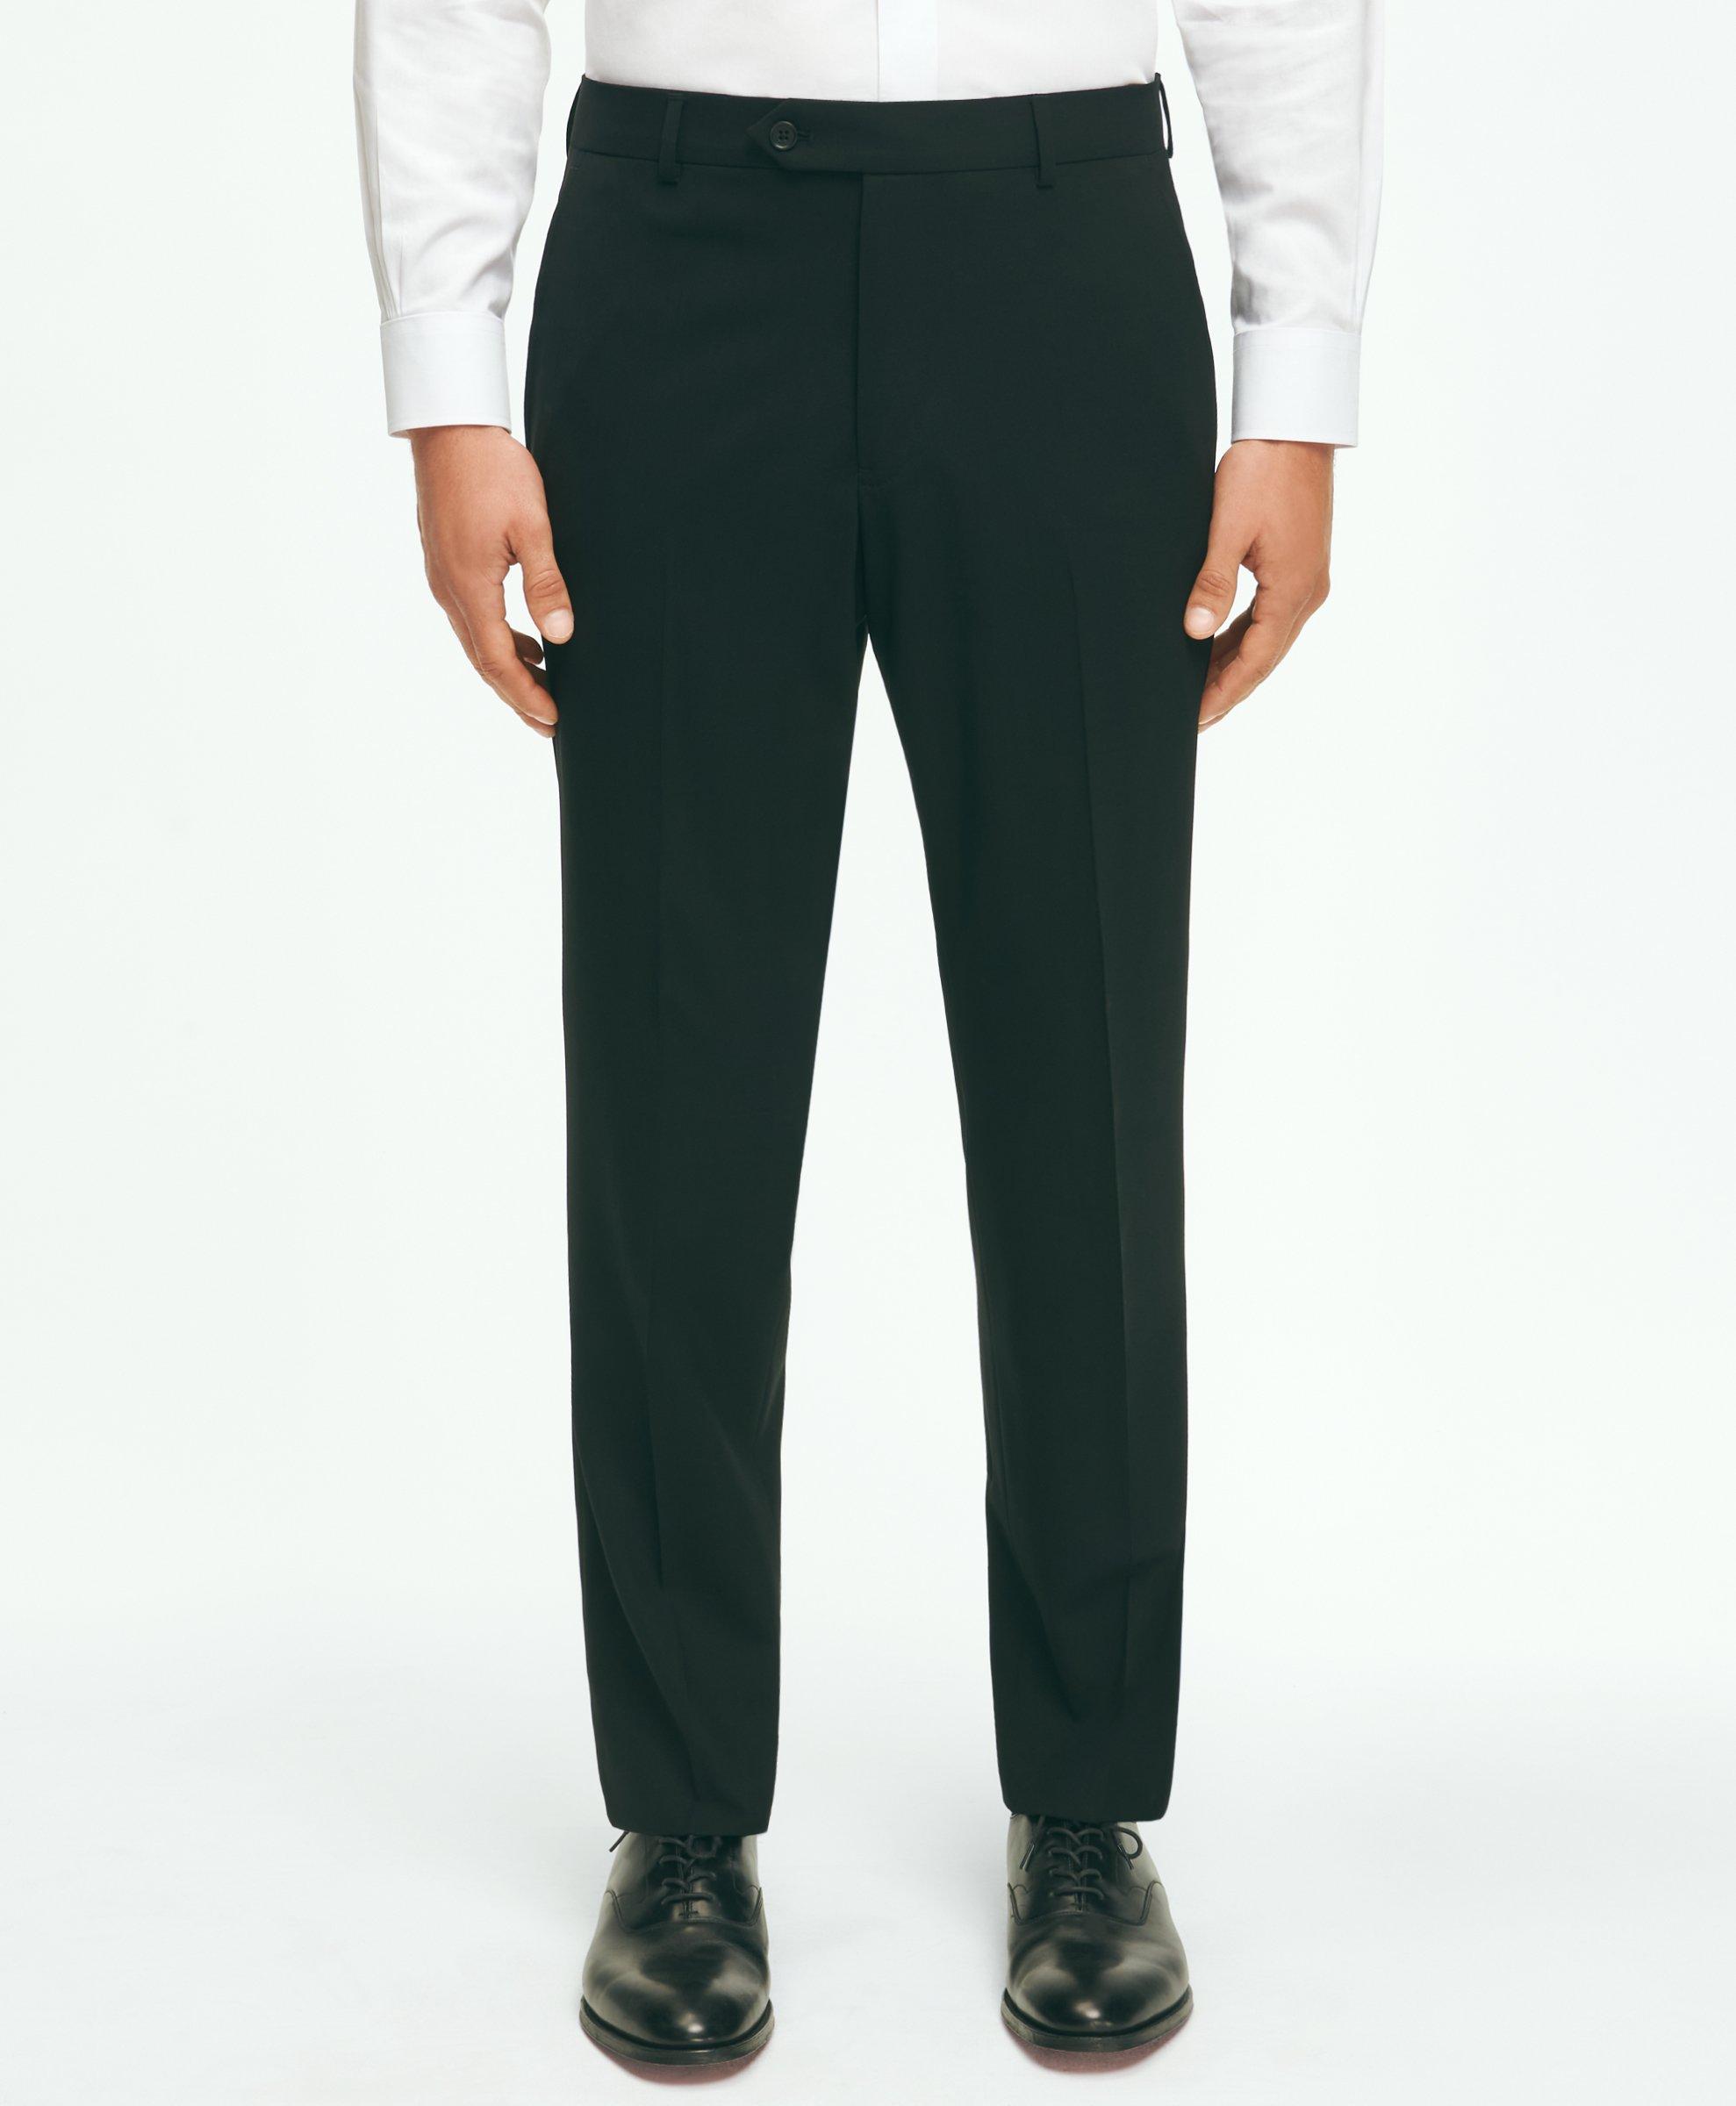 Georges Tailored Pant - Mid Grey - Blended Wool Tailored Pants, Suit Pants